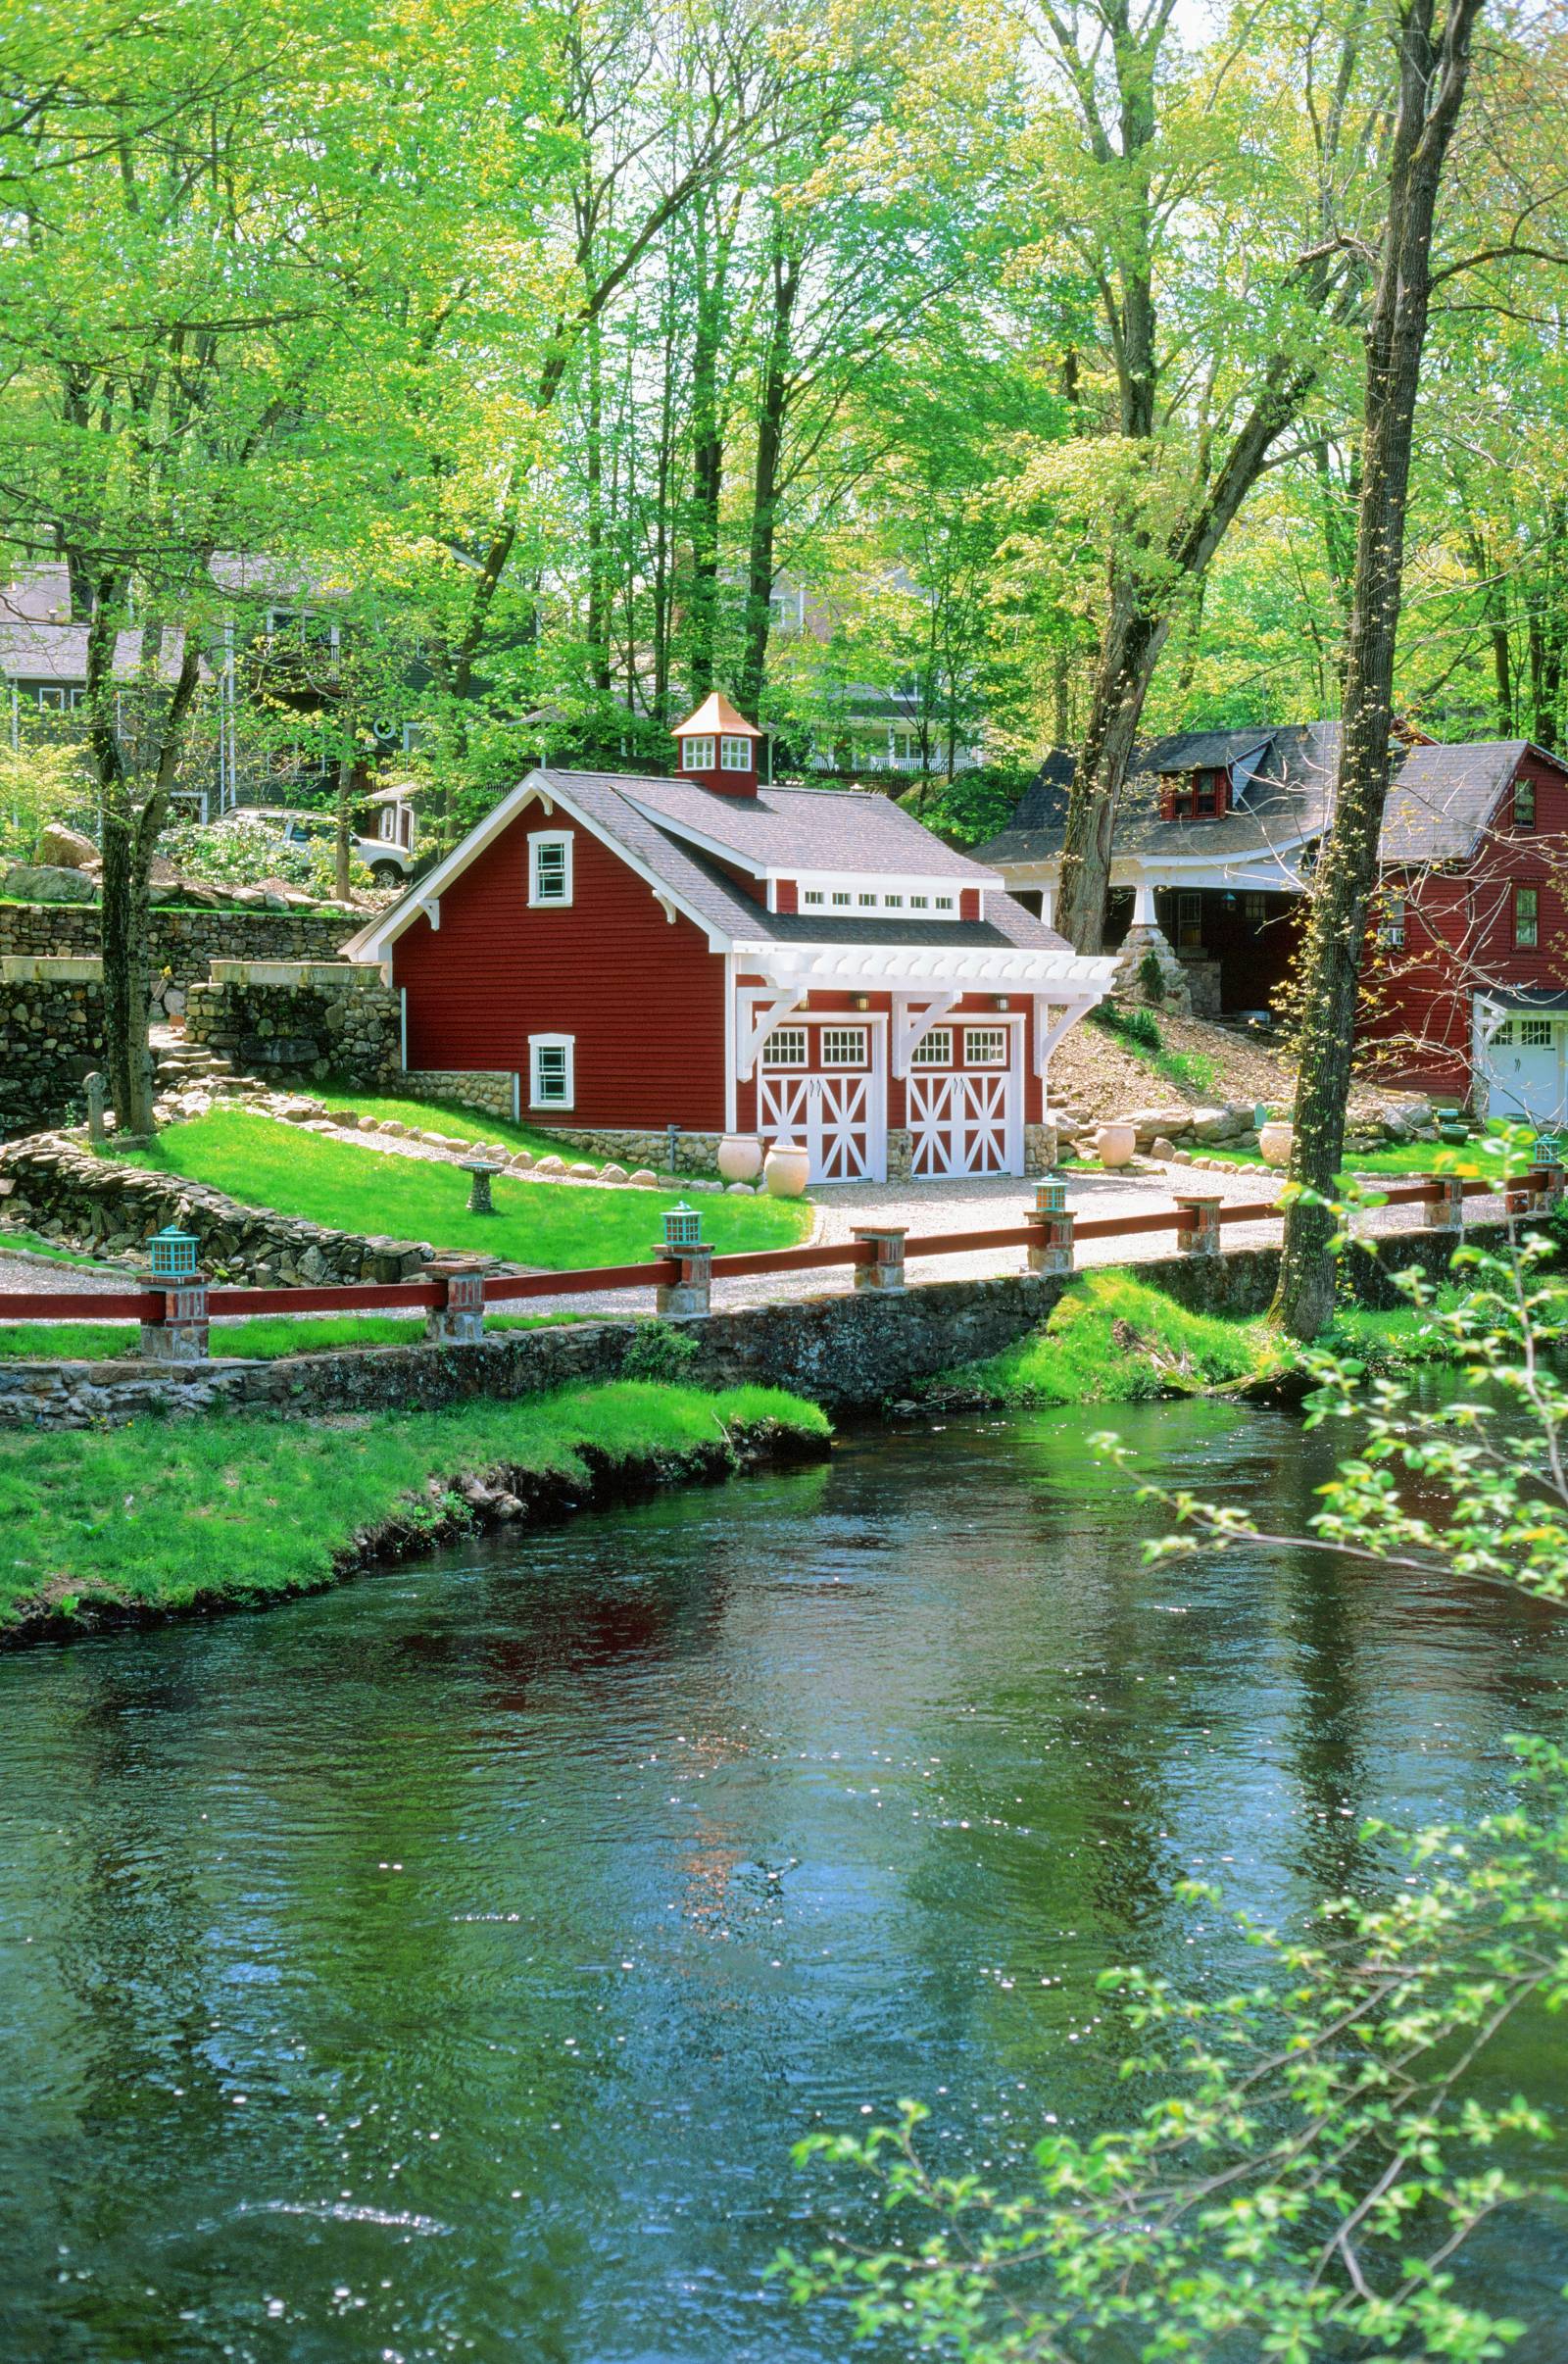 A storybook setting for this custom garage along a riverbank in Fairfield CT